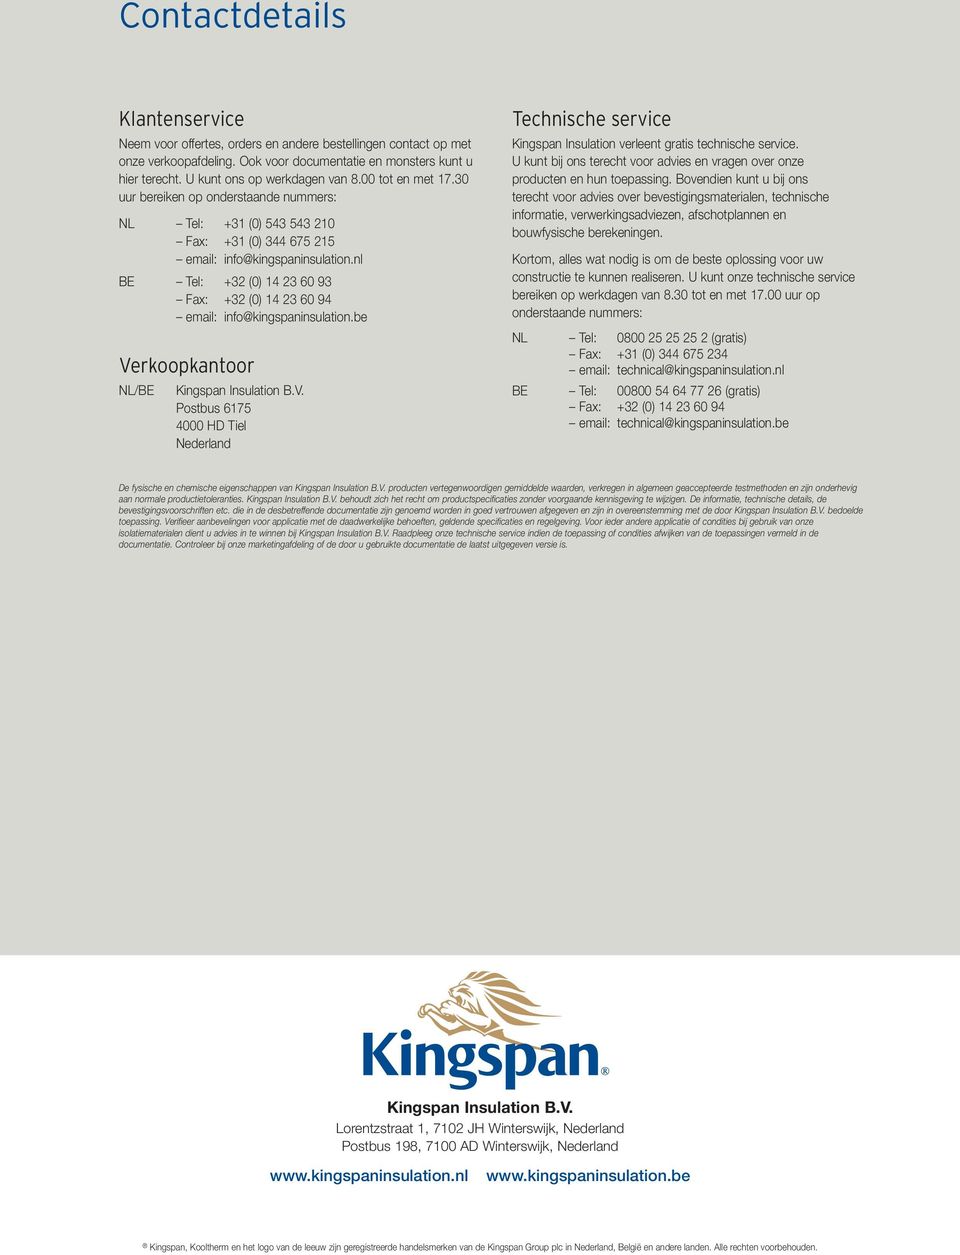 nl BE Tel: +32 (0) 14 23 60 93 Fax: +32 (0) 14 23 60 94 email: info@kingspaninsulation.be Ve